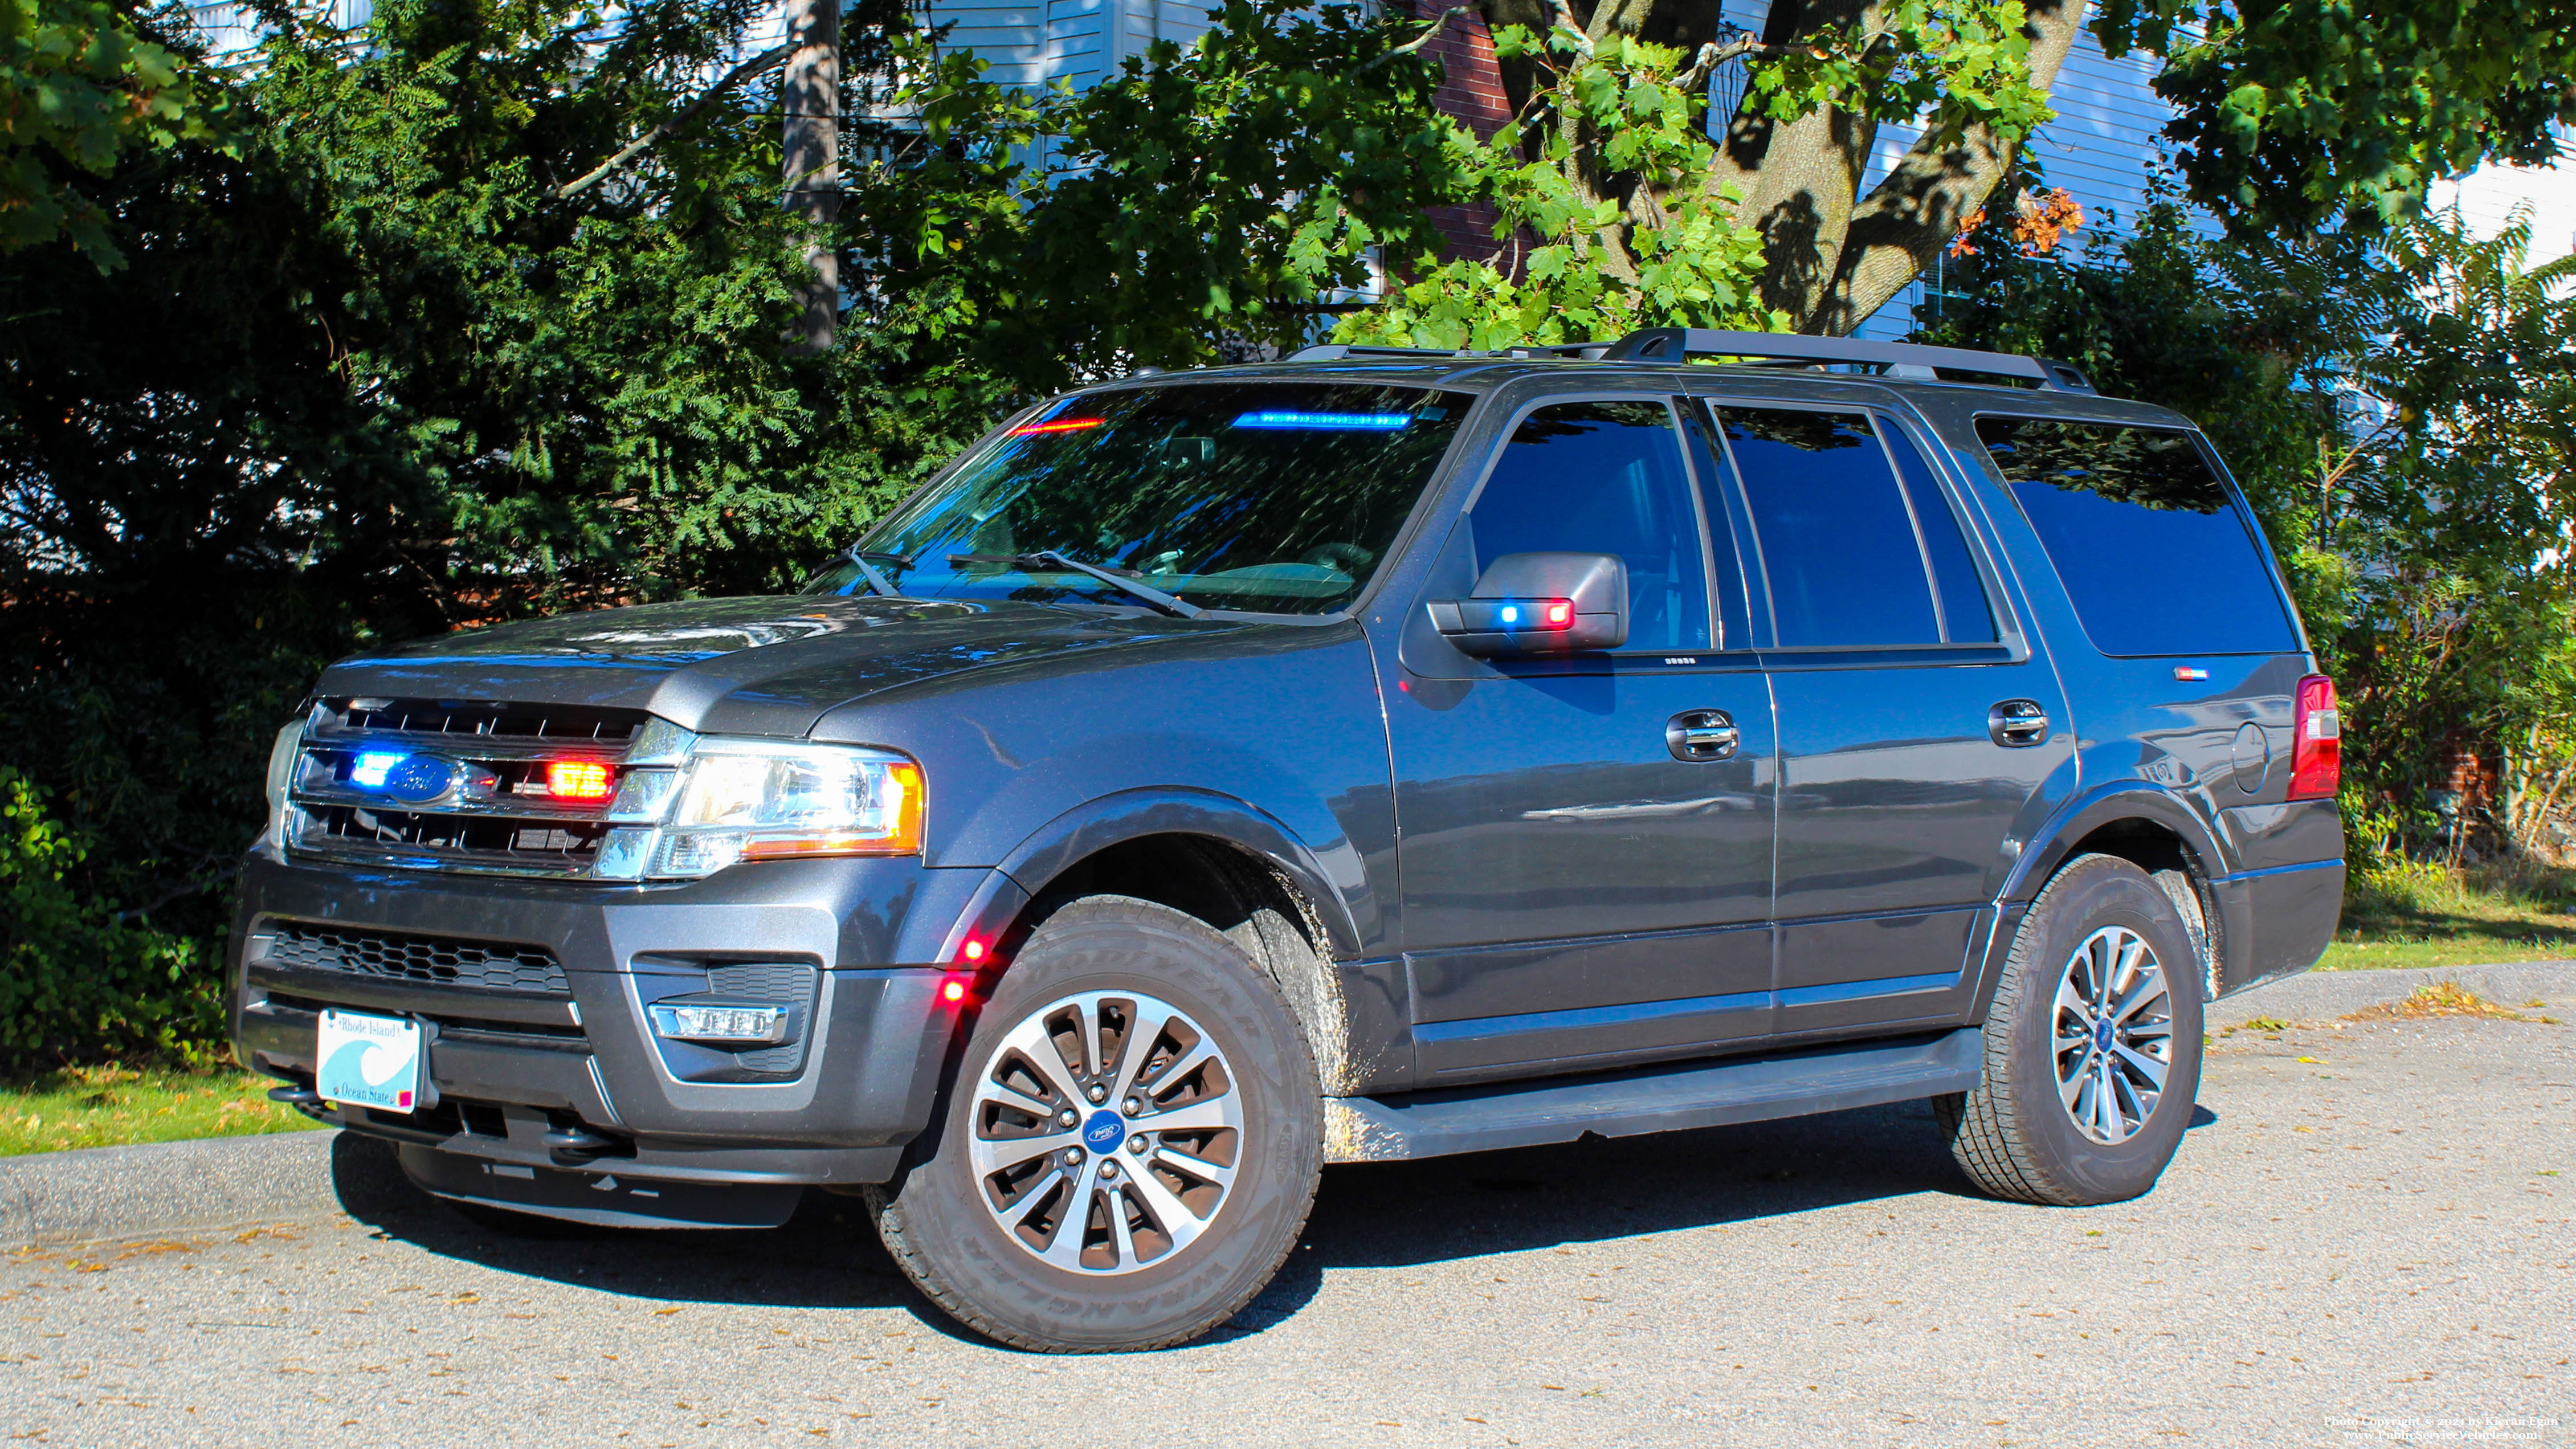 A photo  of East Providence Police
            Cruiser [2]31, a 2015-2019 Ford Expedition             taken by Kieran Egan